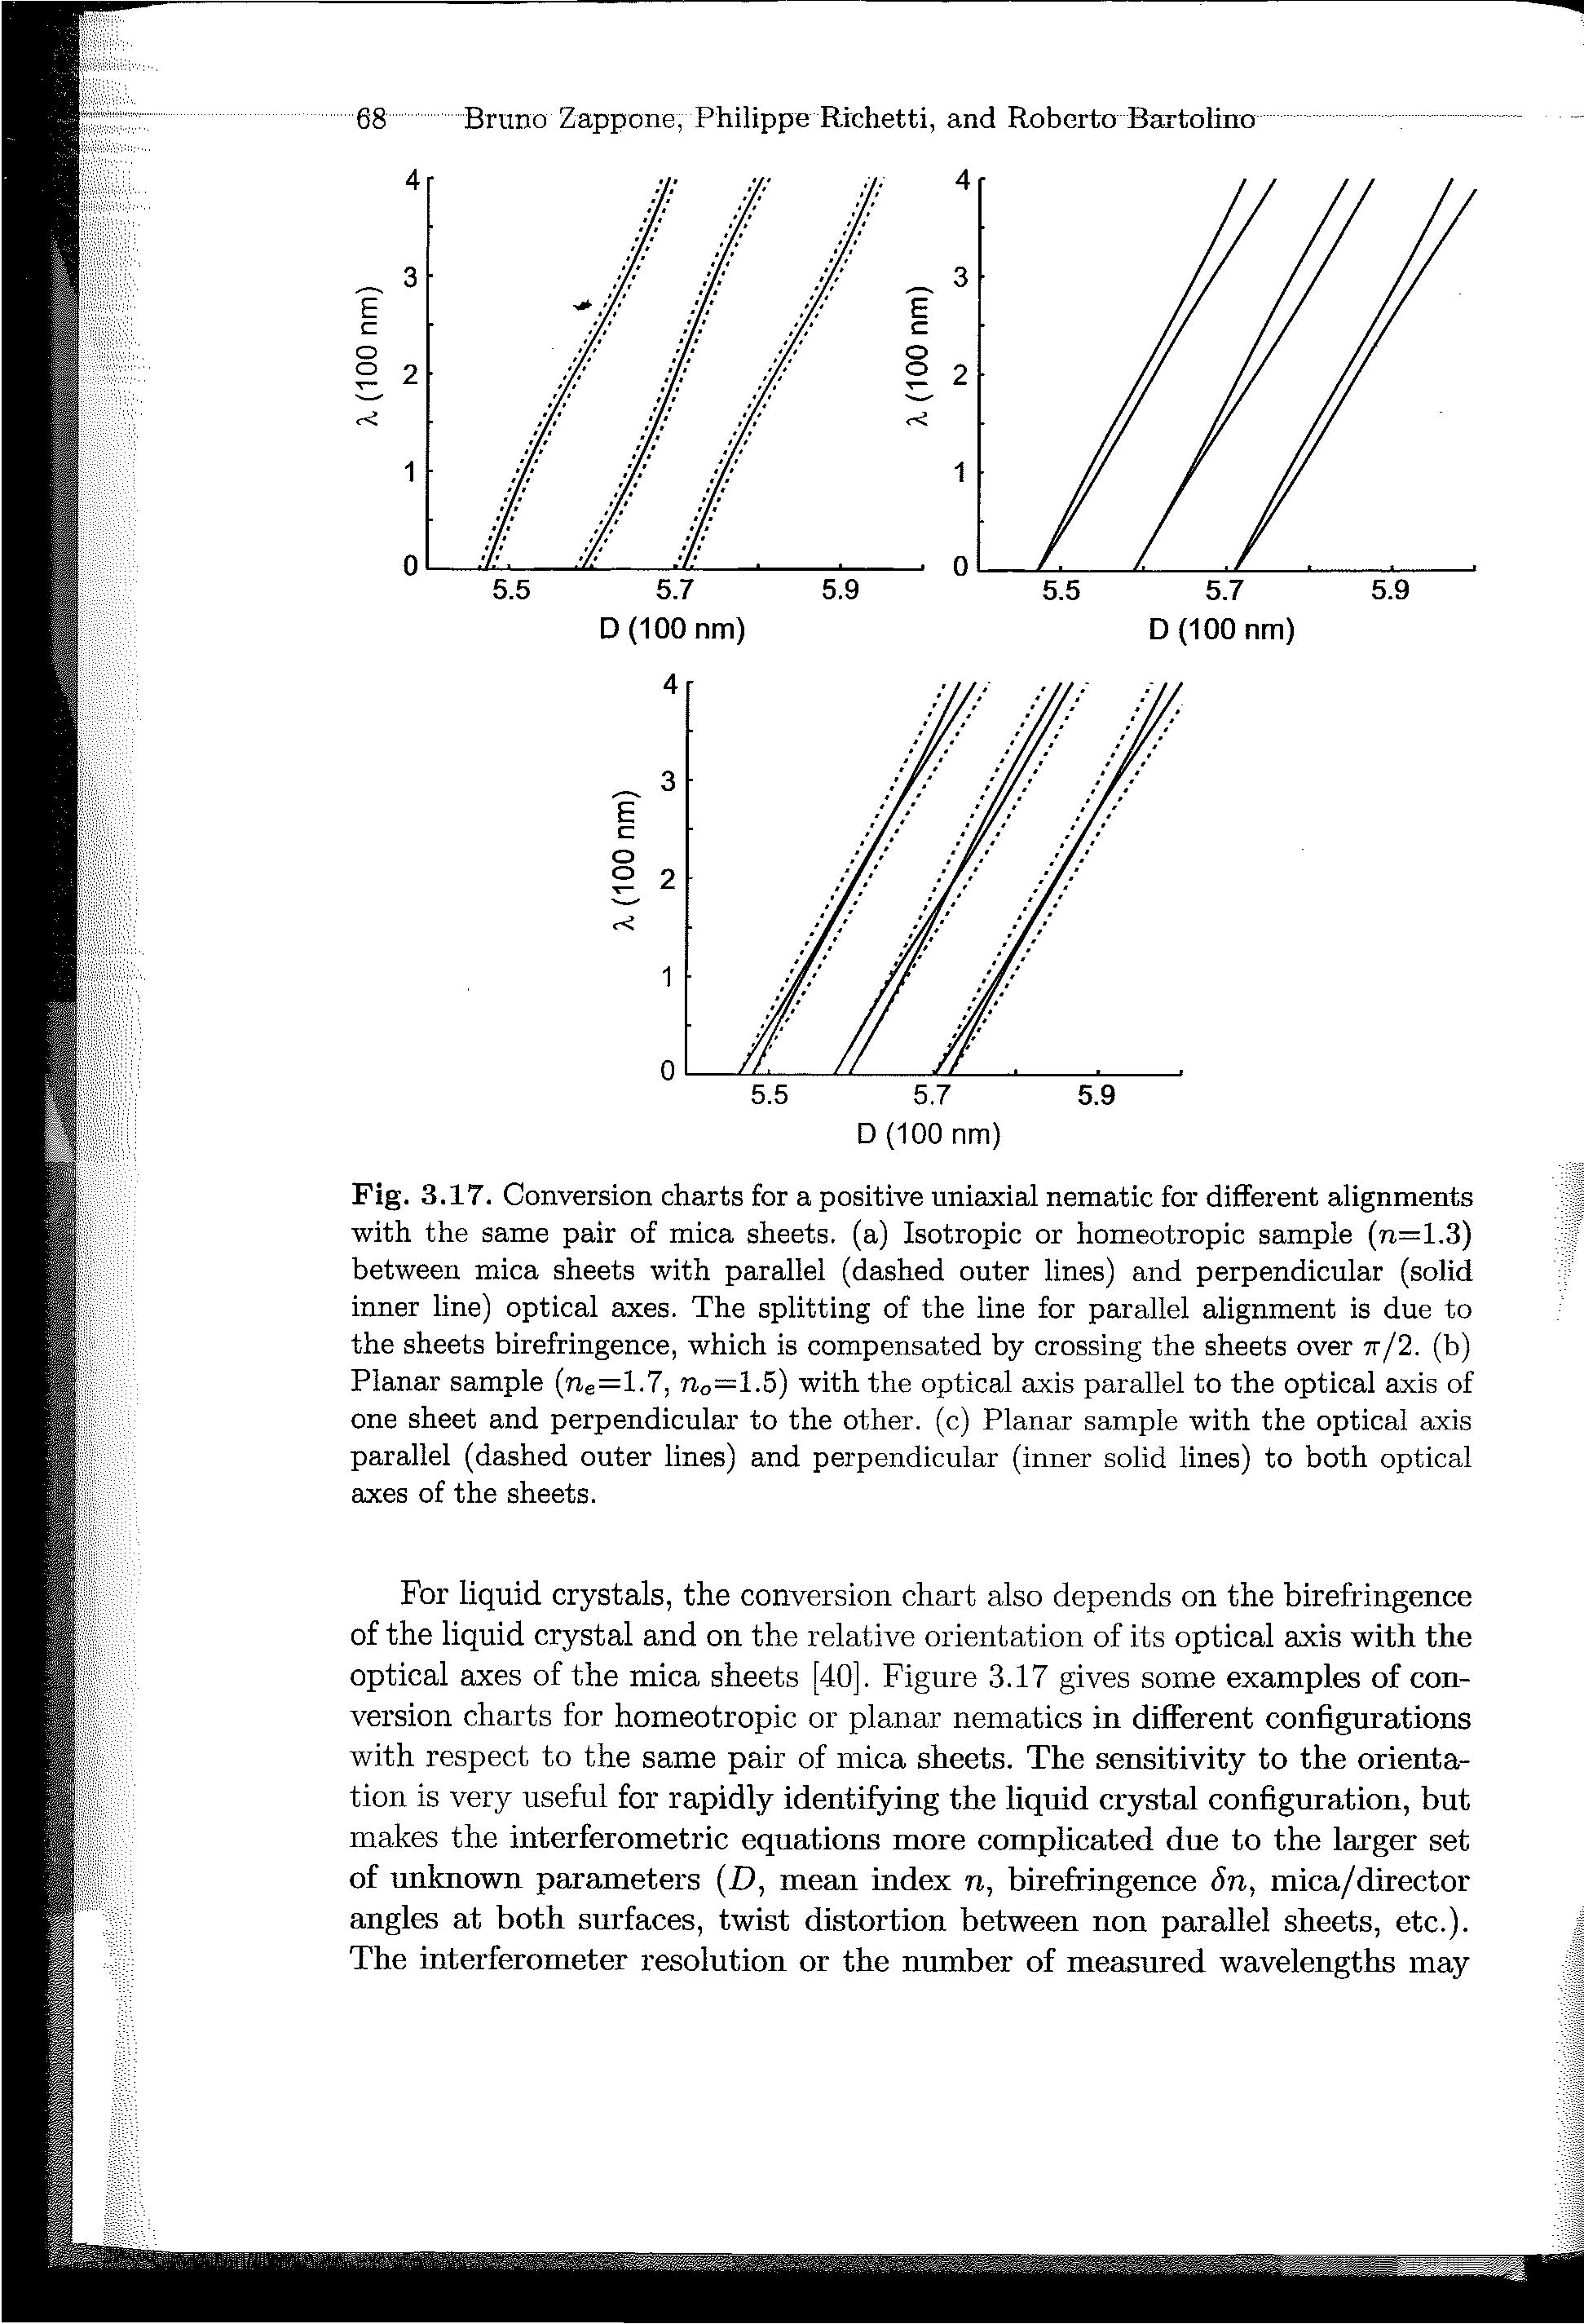 Fig. 3.17. Conversion charts for a positive uniaxial nematic for different alignments with the same pair of mica sheets, (a) Isotropic or homeotropic sample (n=1.3) between mica sheets with parallel (dashed outer lines) and perpendicular (solid inner line) optical axes. The splitting of the line for parallel alignment is due to the sheets birefringence, which is compensated by crossing the sheets over 7t/2. (b) Planar sample (rie=1.7, no=1.5) with the optical axis parallel to the optical axis of one sheet and perpendicular to the other, (c) Planar sample with the optical axis parallel (dashed outer lines) and perpendicular (inner solid lines) to both optical axes of the sheets.